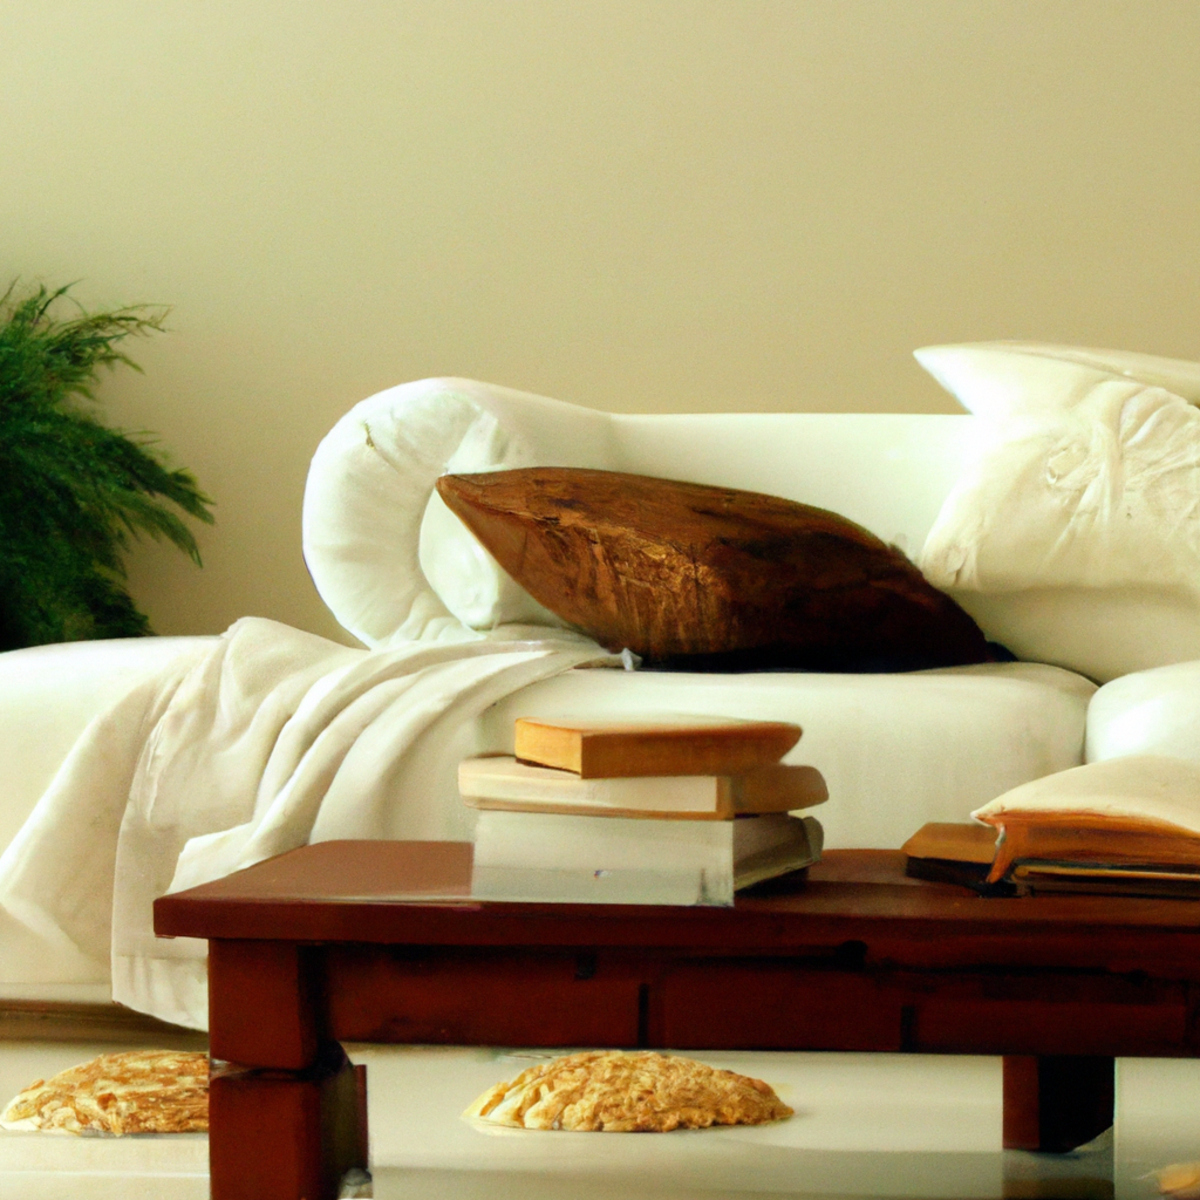 A serene living room with cozy armchair, blanket, tea, books, and motivational art promotes relaxation and self-care.